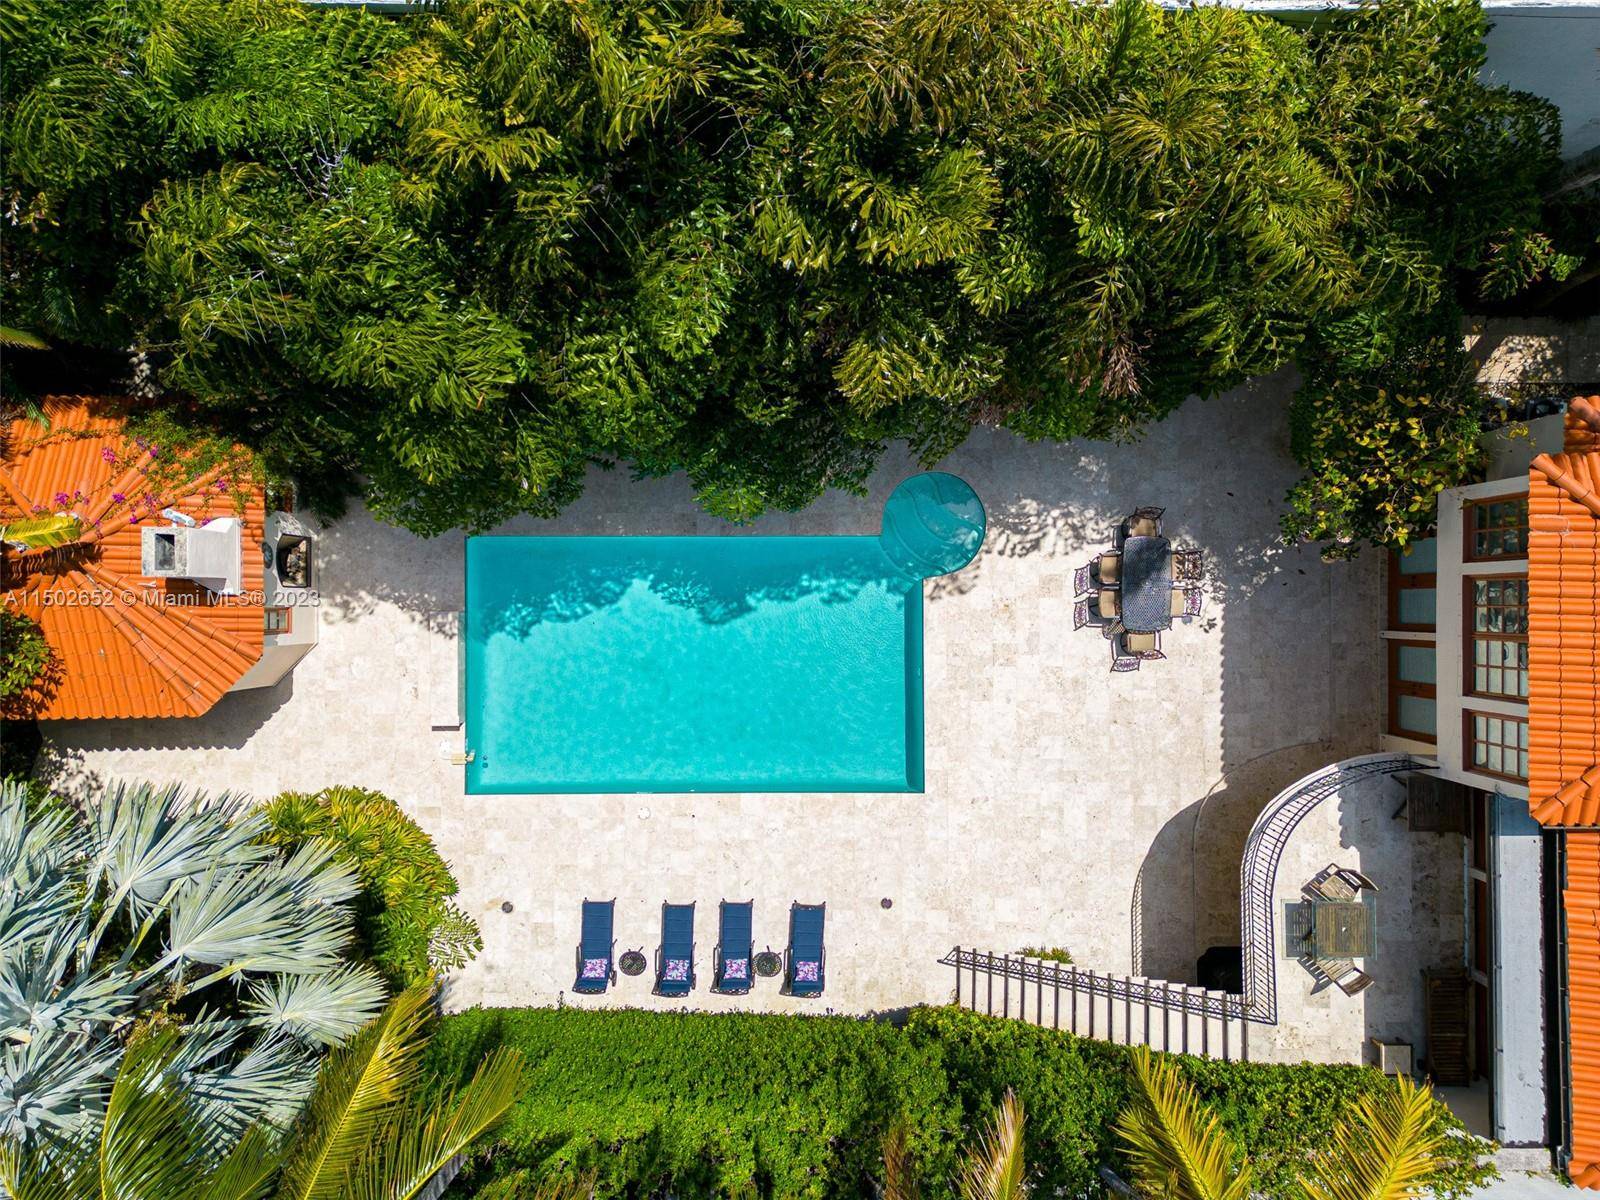 Live in the heart of South Beach in this historically preserved Mediterranean Revival style home Designed by famed architect Henry Hohauser.